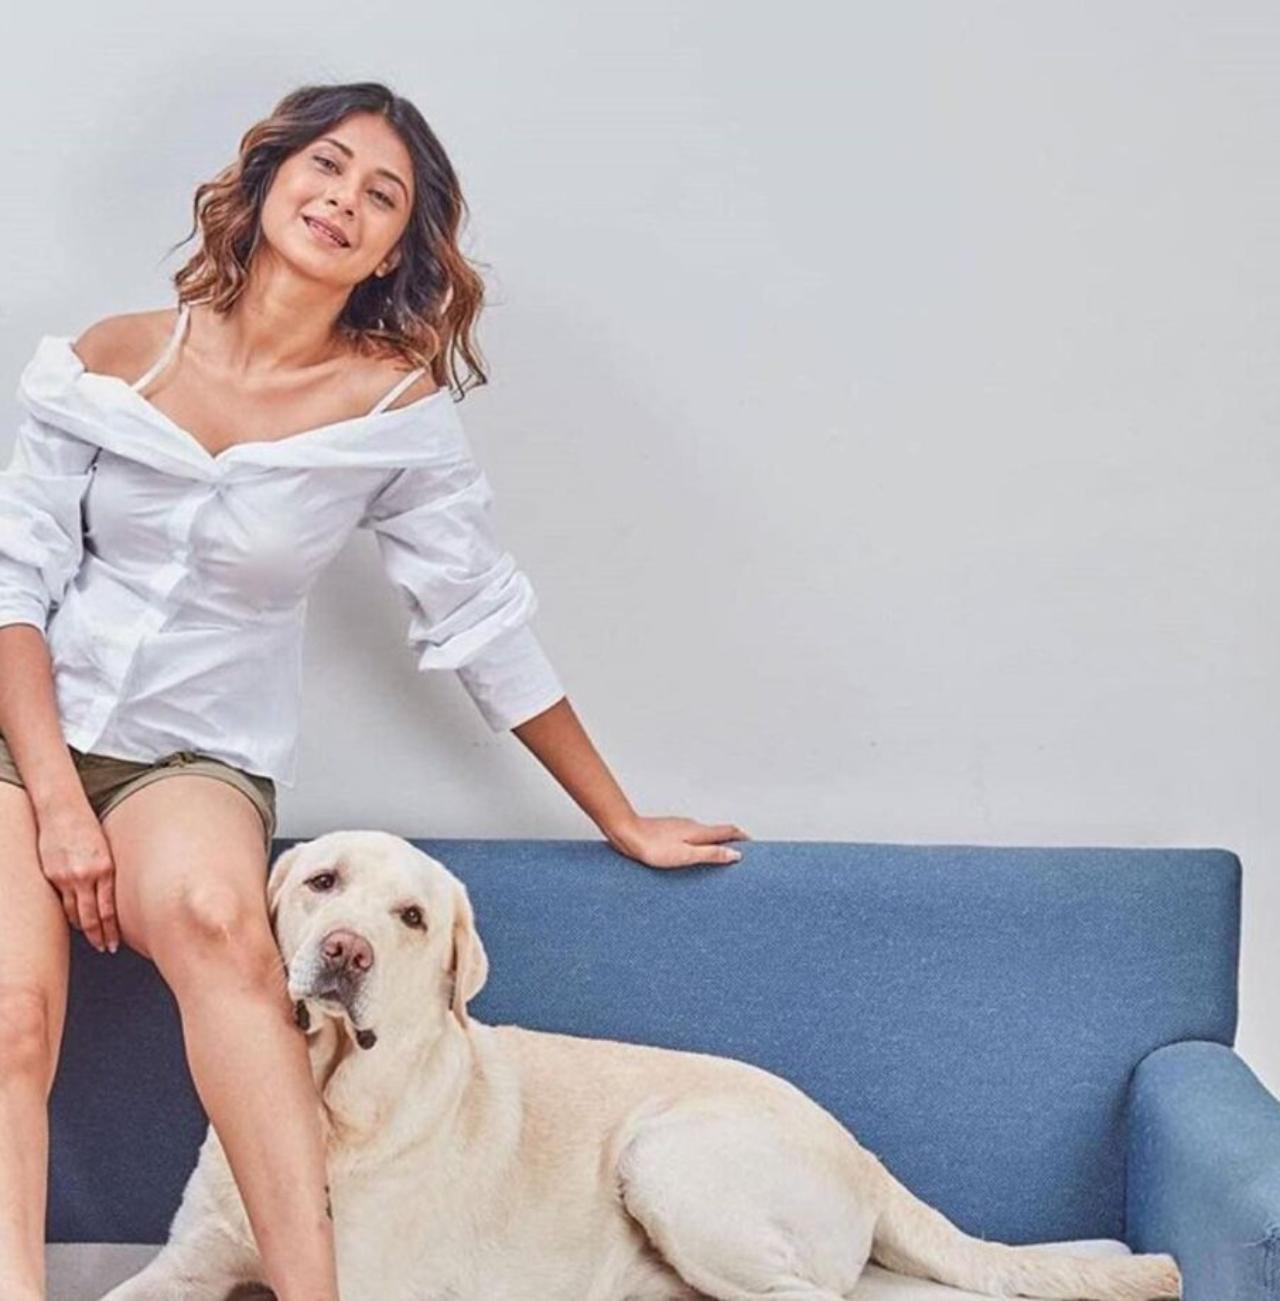 Jennifer Winget 
Jennifer Winget adored her Labrador companion, affectionately named Breezer. Her social media is adorned with a delightful collection of pictures showcasing her furry friend snuggled up beside her, playing joyfully, partaking in Christmas and birthday celebrations, and occasionally even joining her on set